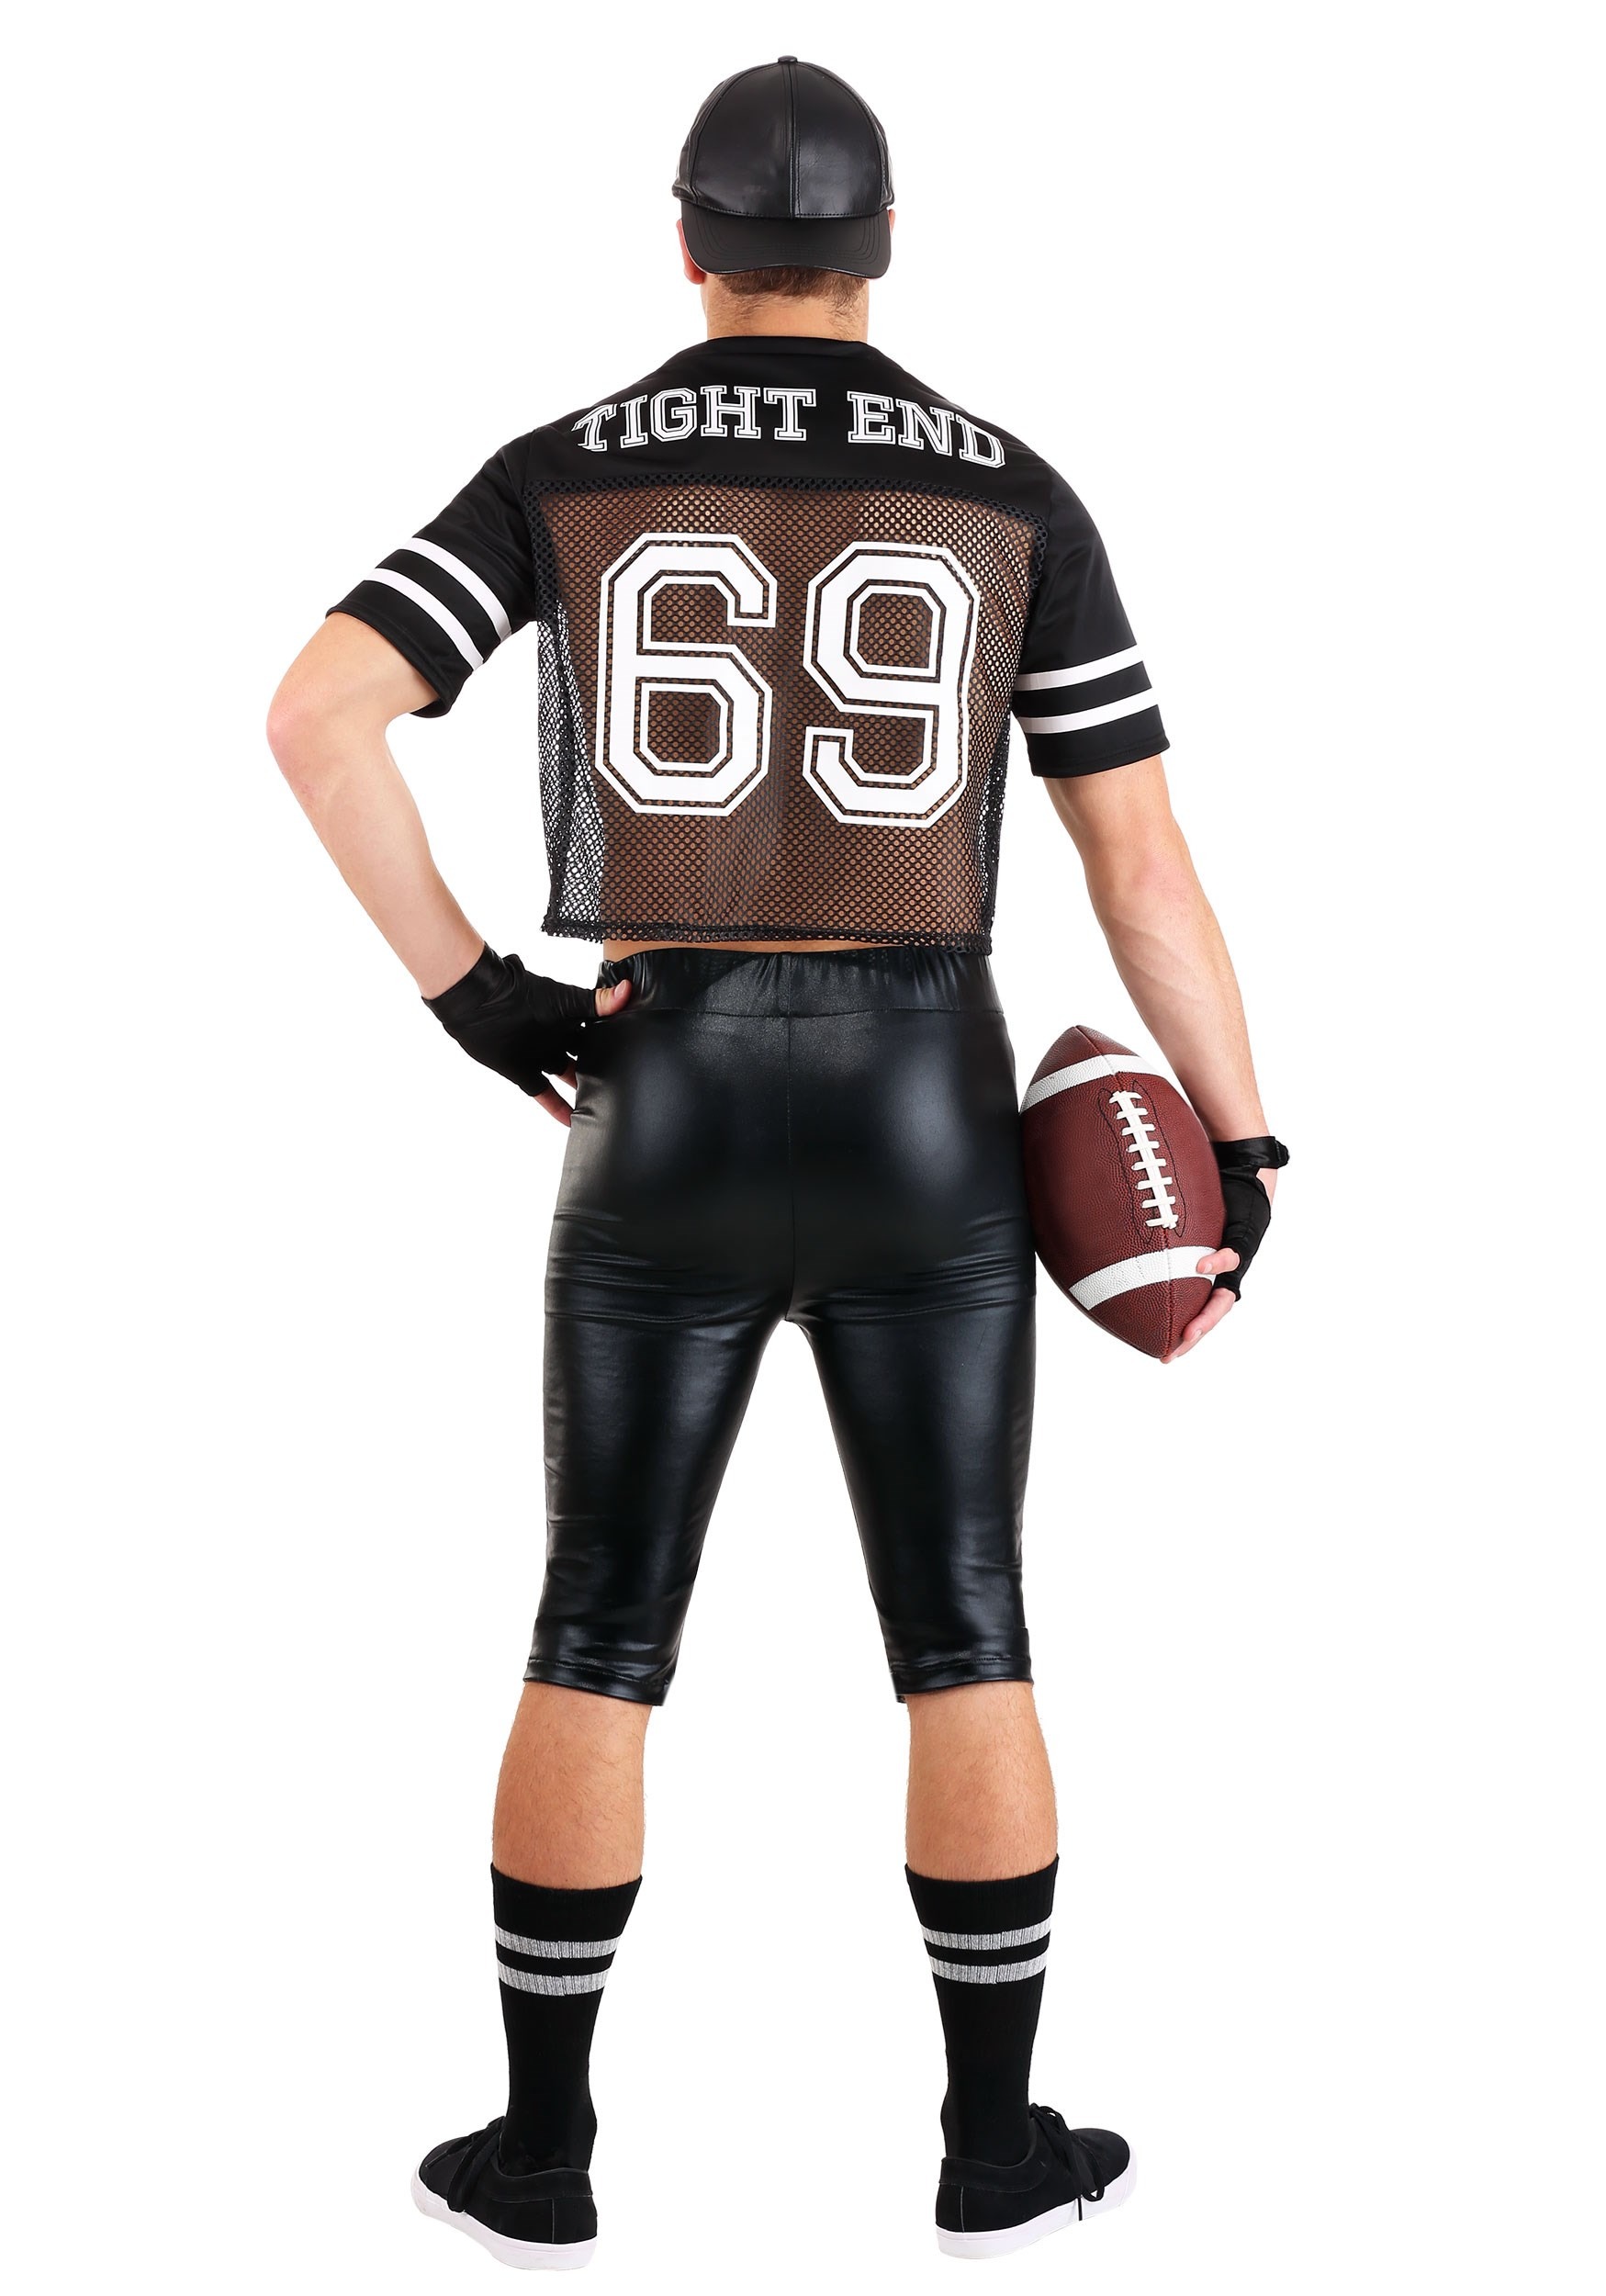 Tight End Footballer Fancy Dress Costume For Adults